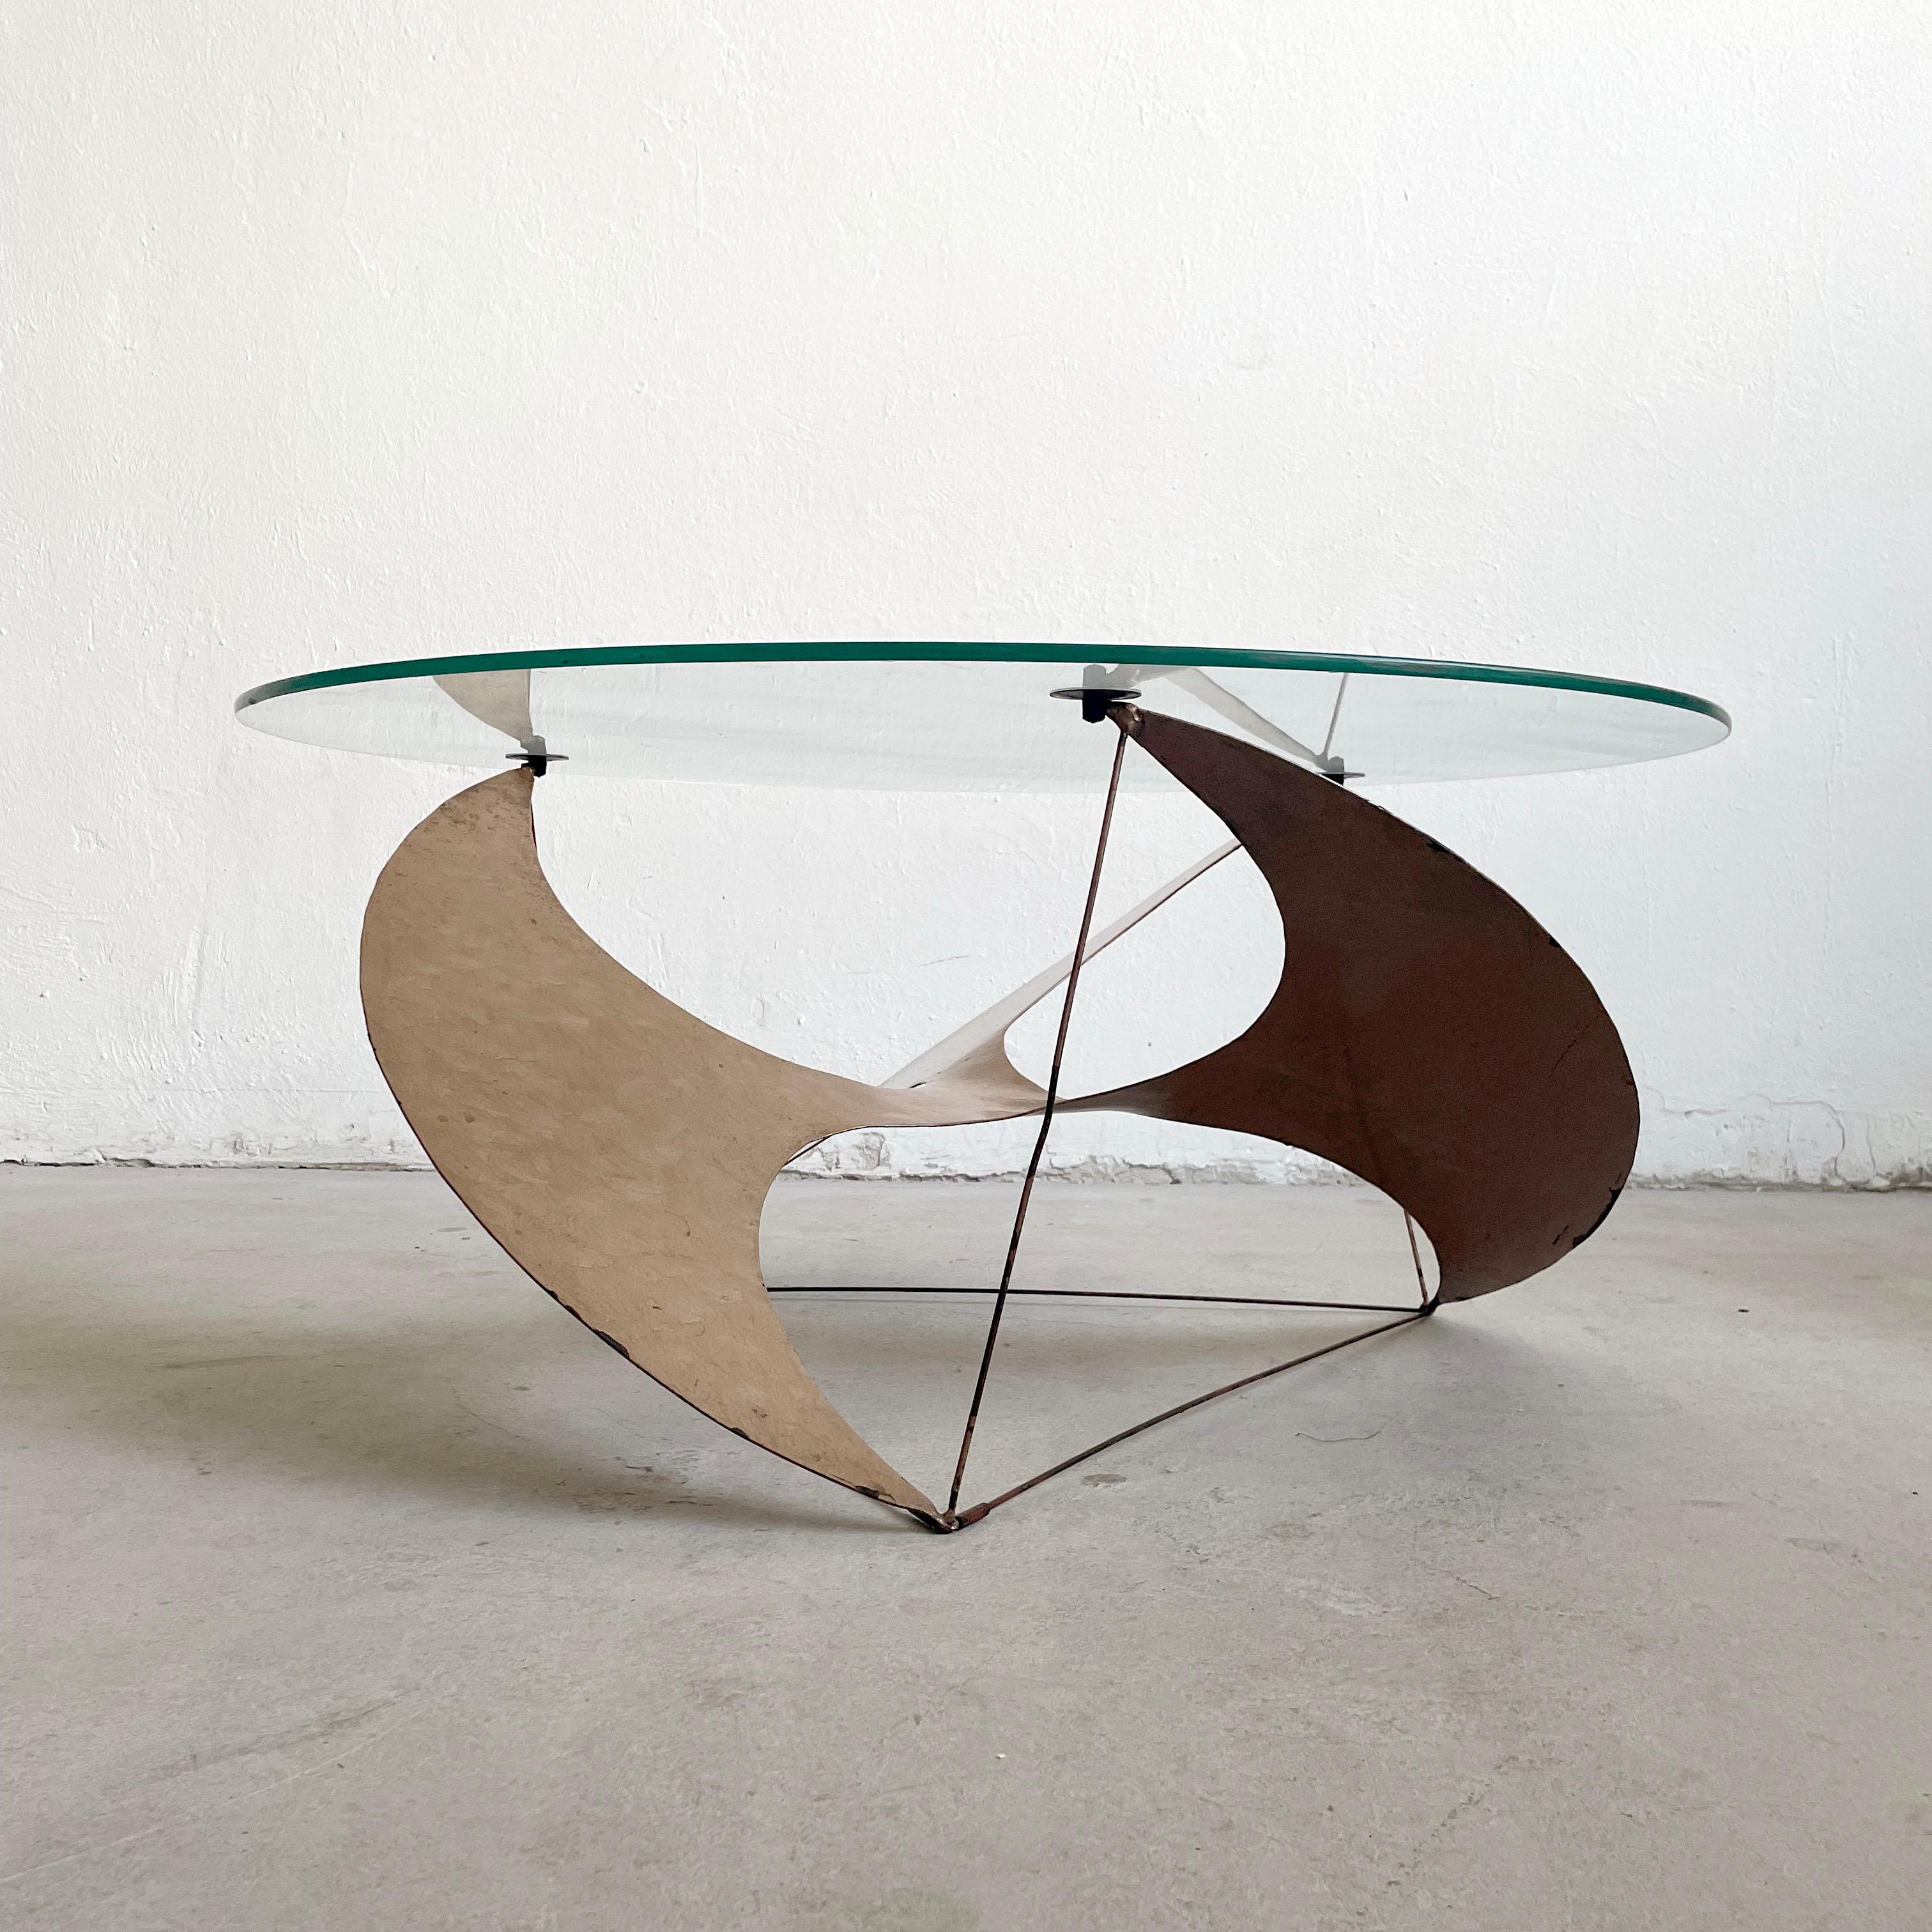 A little piece of art, an unique one-of-a-kind vintage sculptural custom made artisan coffee table from the 1970's with beautiful patina.

The base of the table is propeller shaped and could have been inspired by the design of Knut Hesterberg.

The